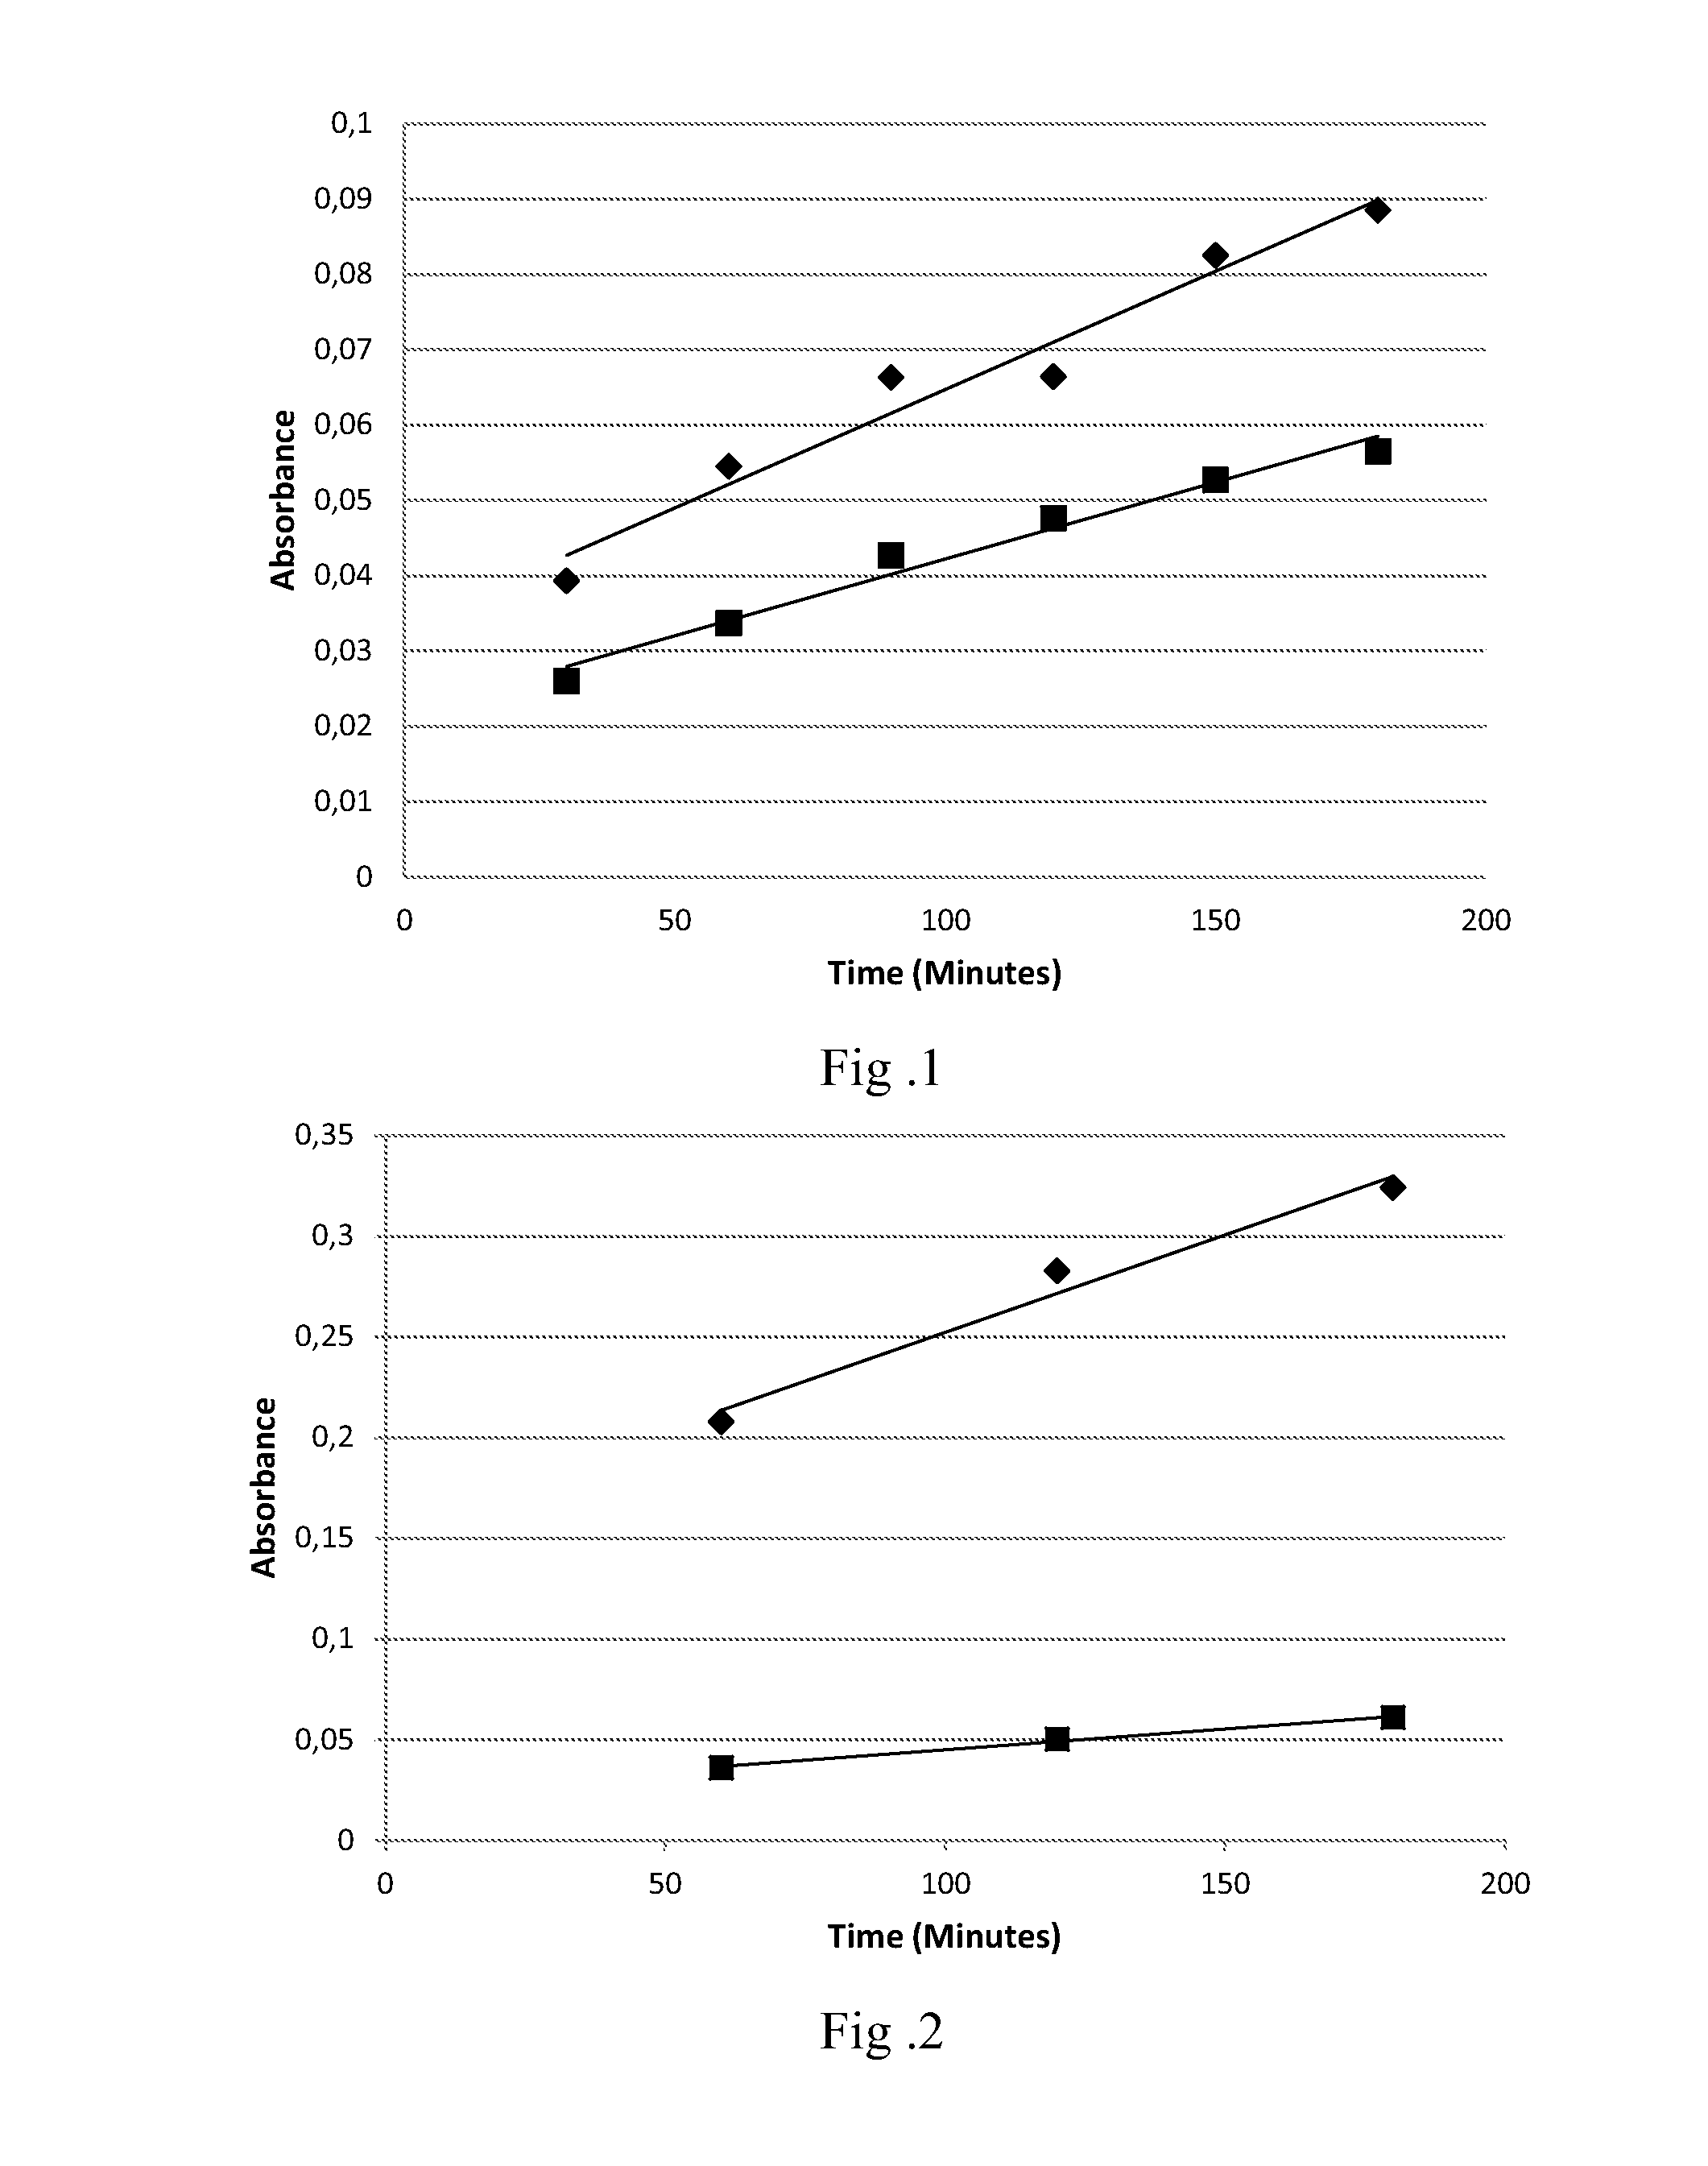 Oxidative Dyeing Compositions Comprising an 1-Hexyl/Heptyl-4,5-diaminopyrazole and a 2-Aminophenol and Derivatives Thereof